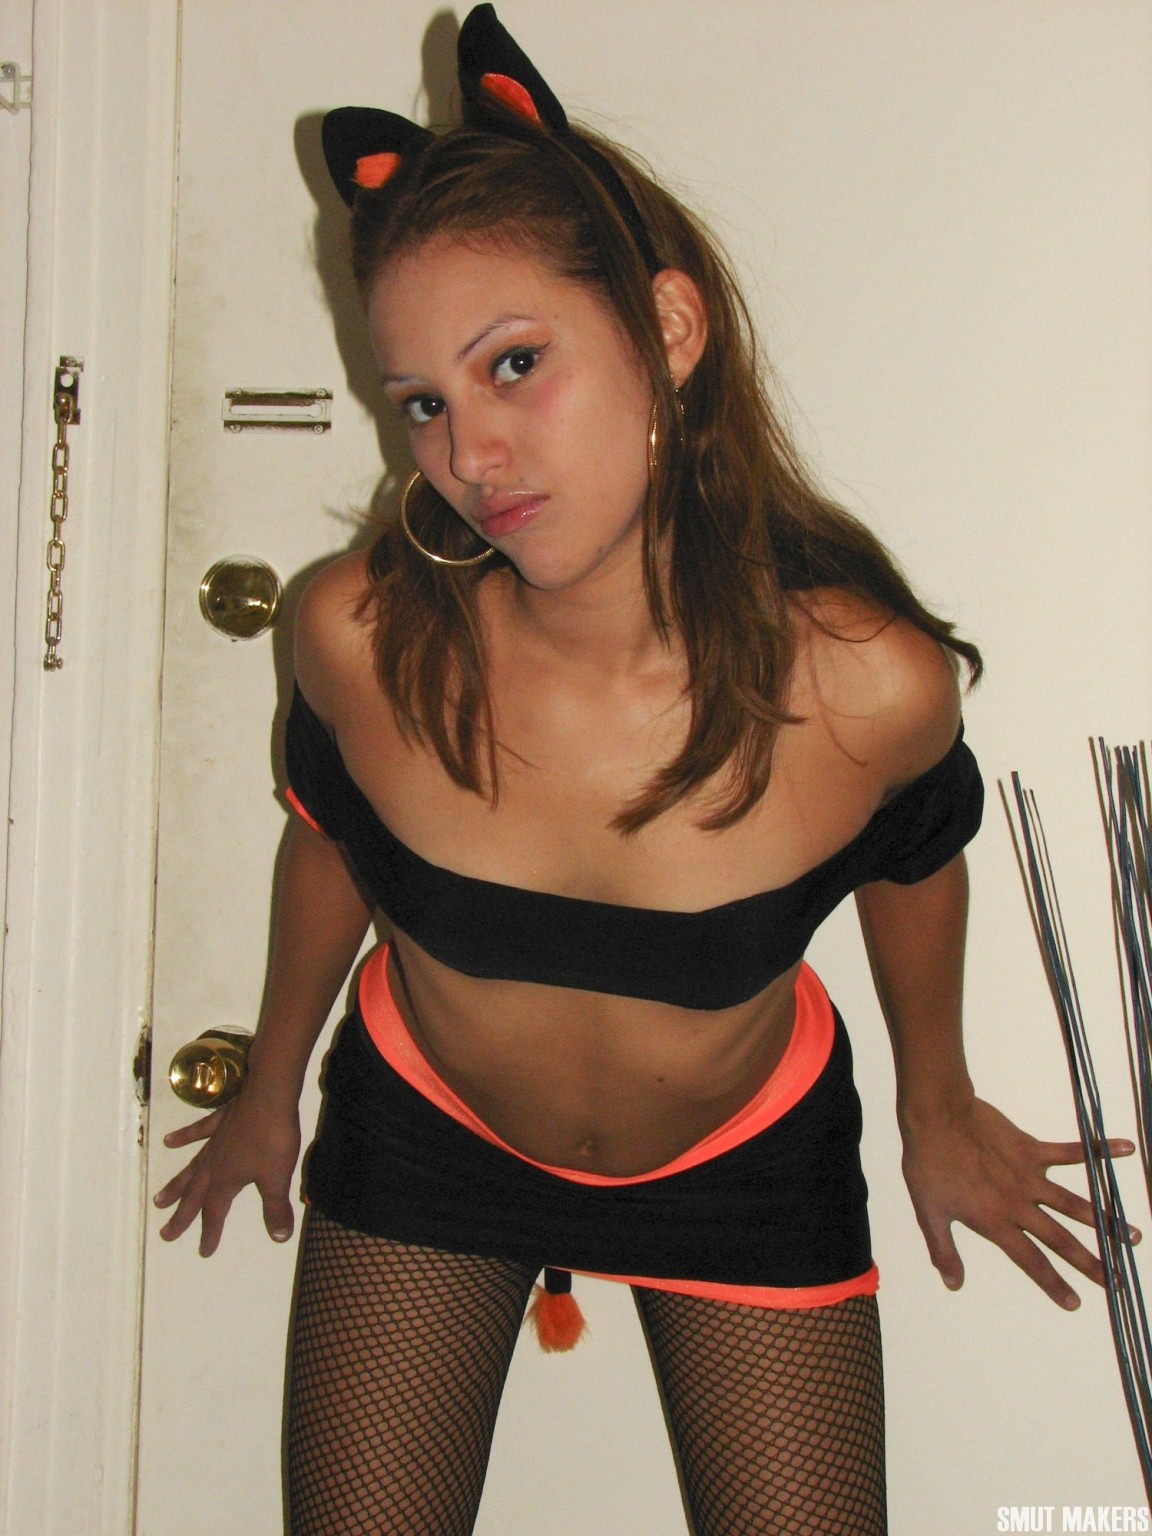 Smut Makes presents a naughty teen in pussy costume for Halloween #67366092